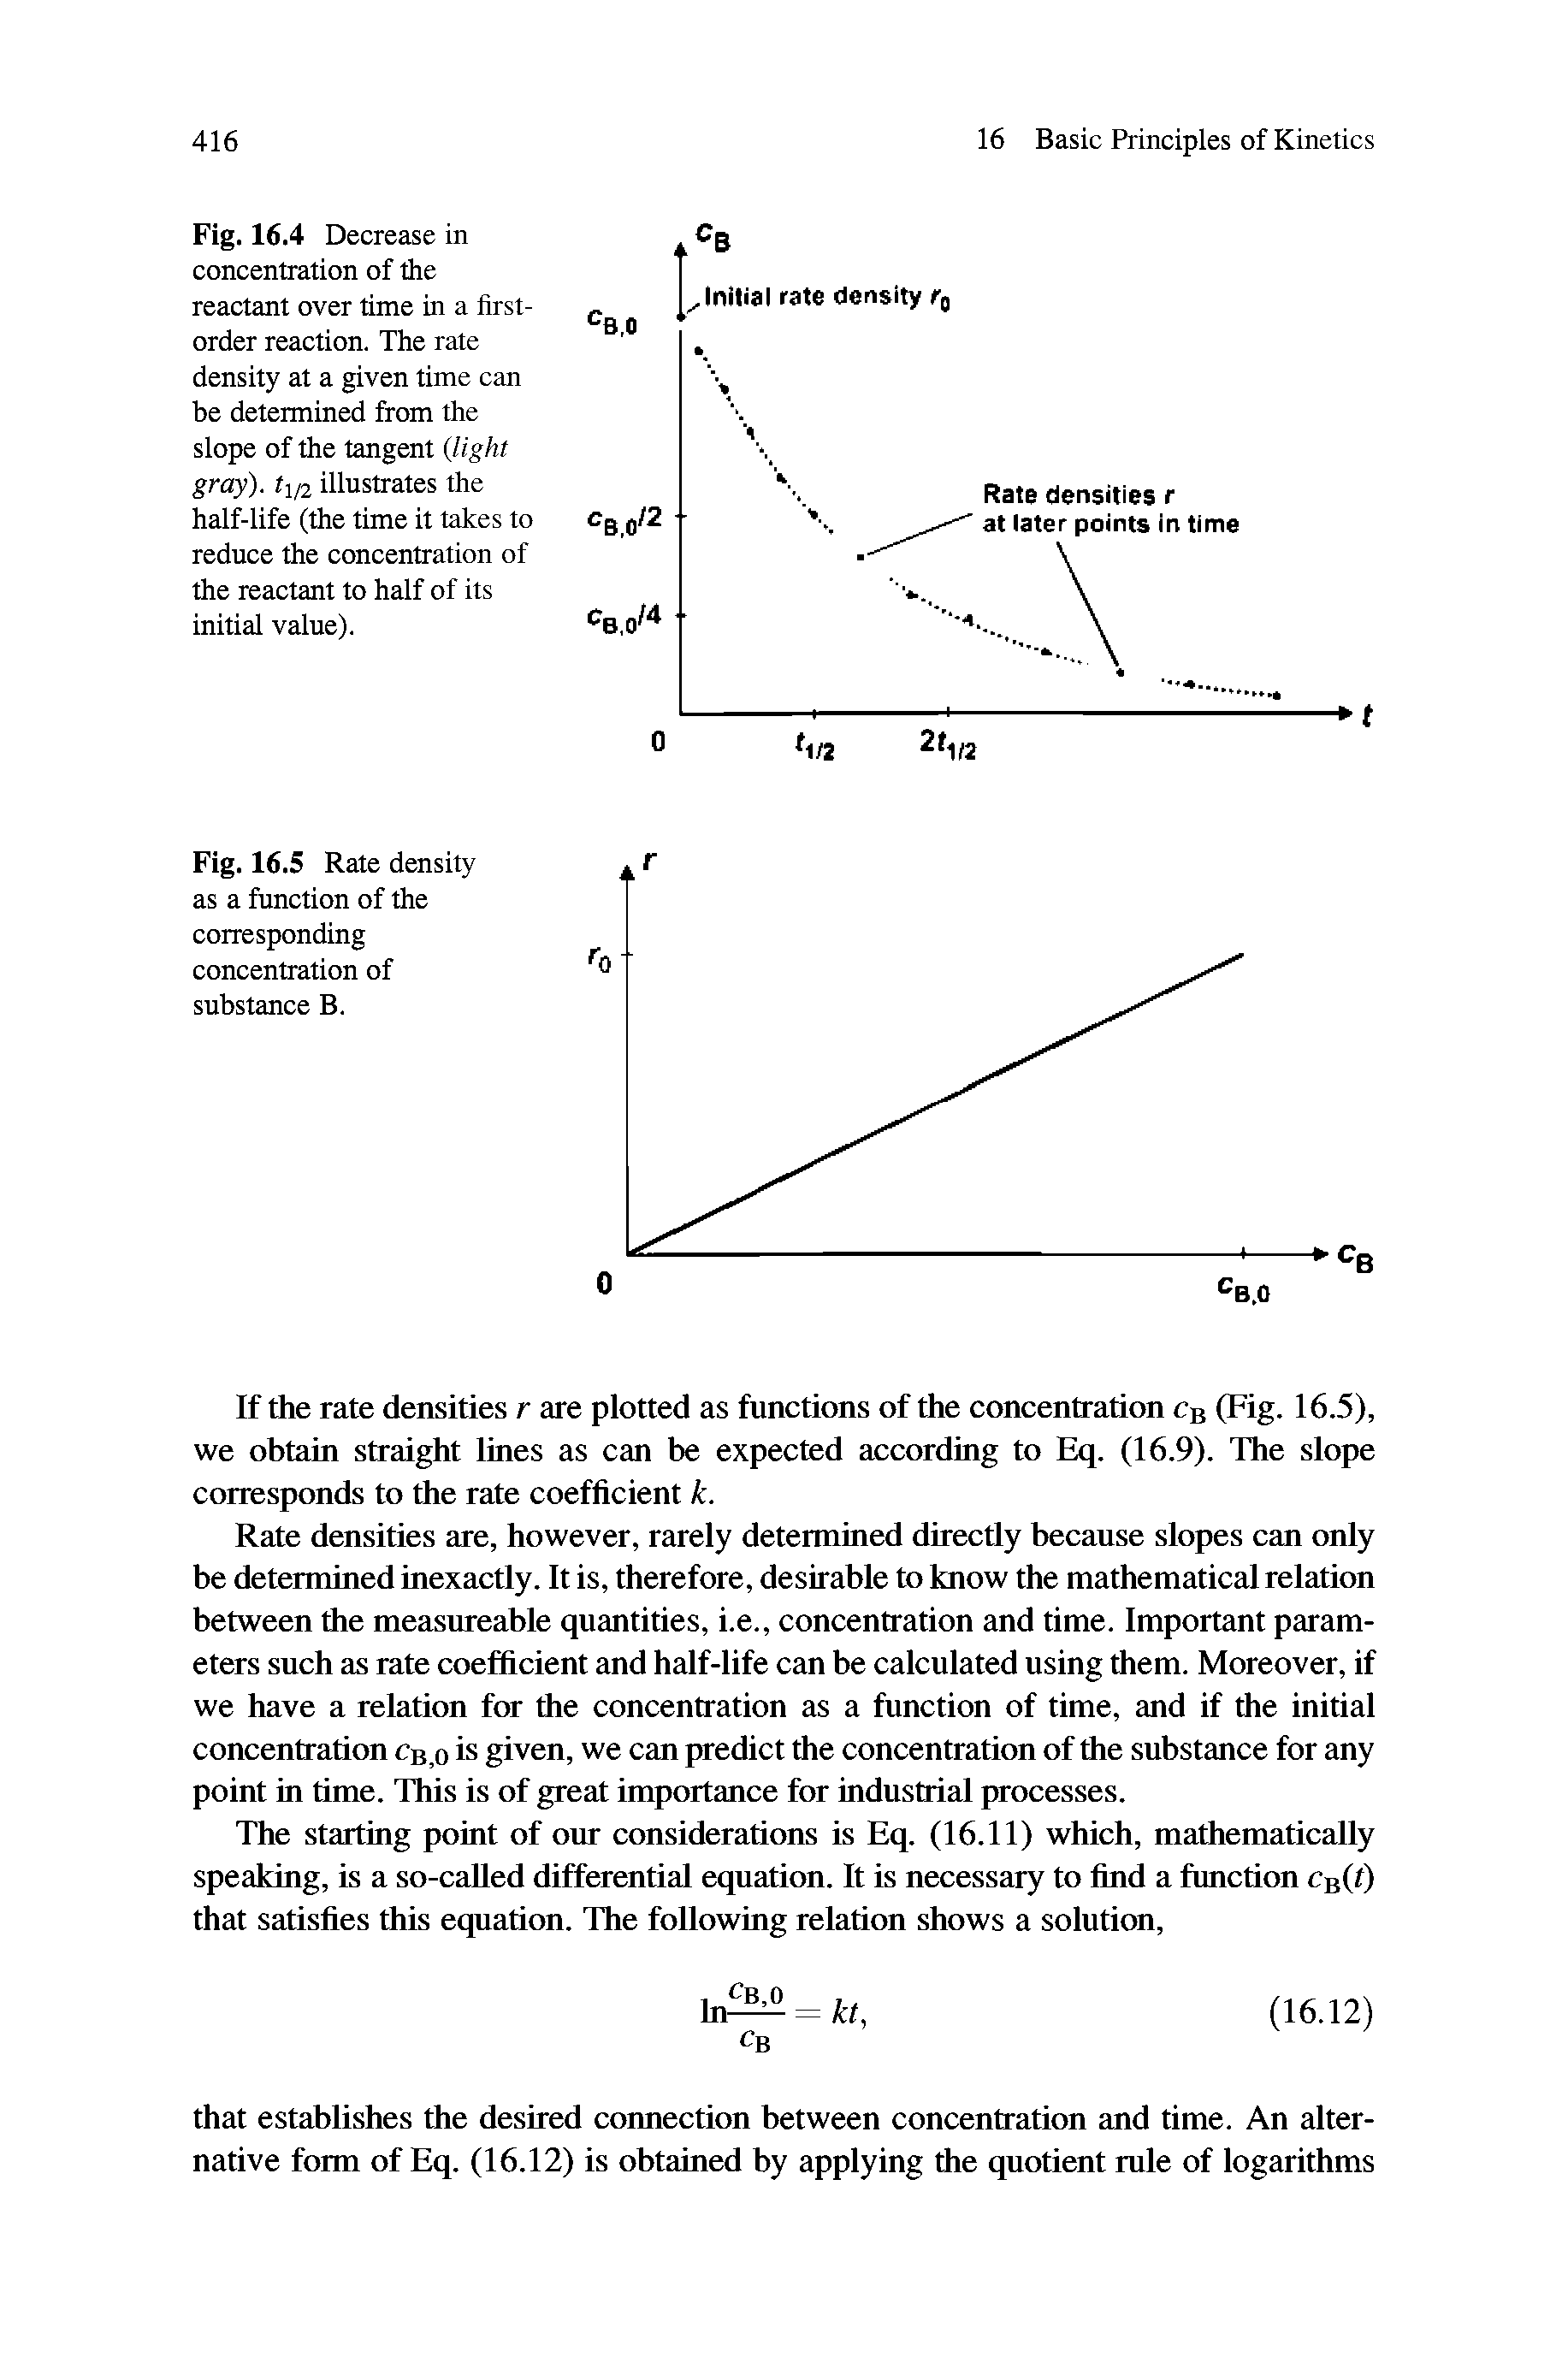 Fig. 16.4 Decrease in concentration of the reactant over time in a first-order reaction. The rate density at a given time can be determined from the slope of the tangent light gray). tn2 illustrates the half-life (the time it takes to reduce the concentration of the reactant to half of its initial value).